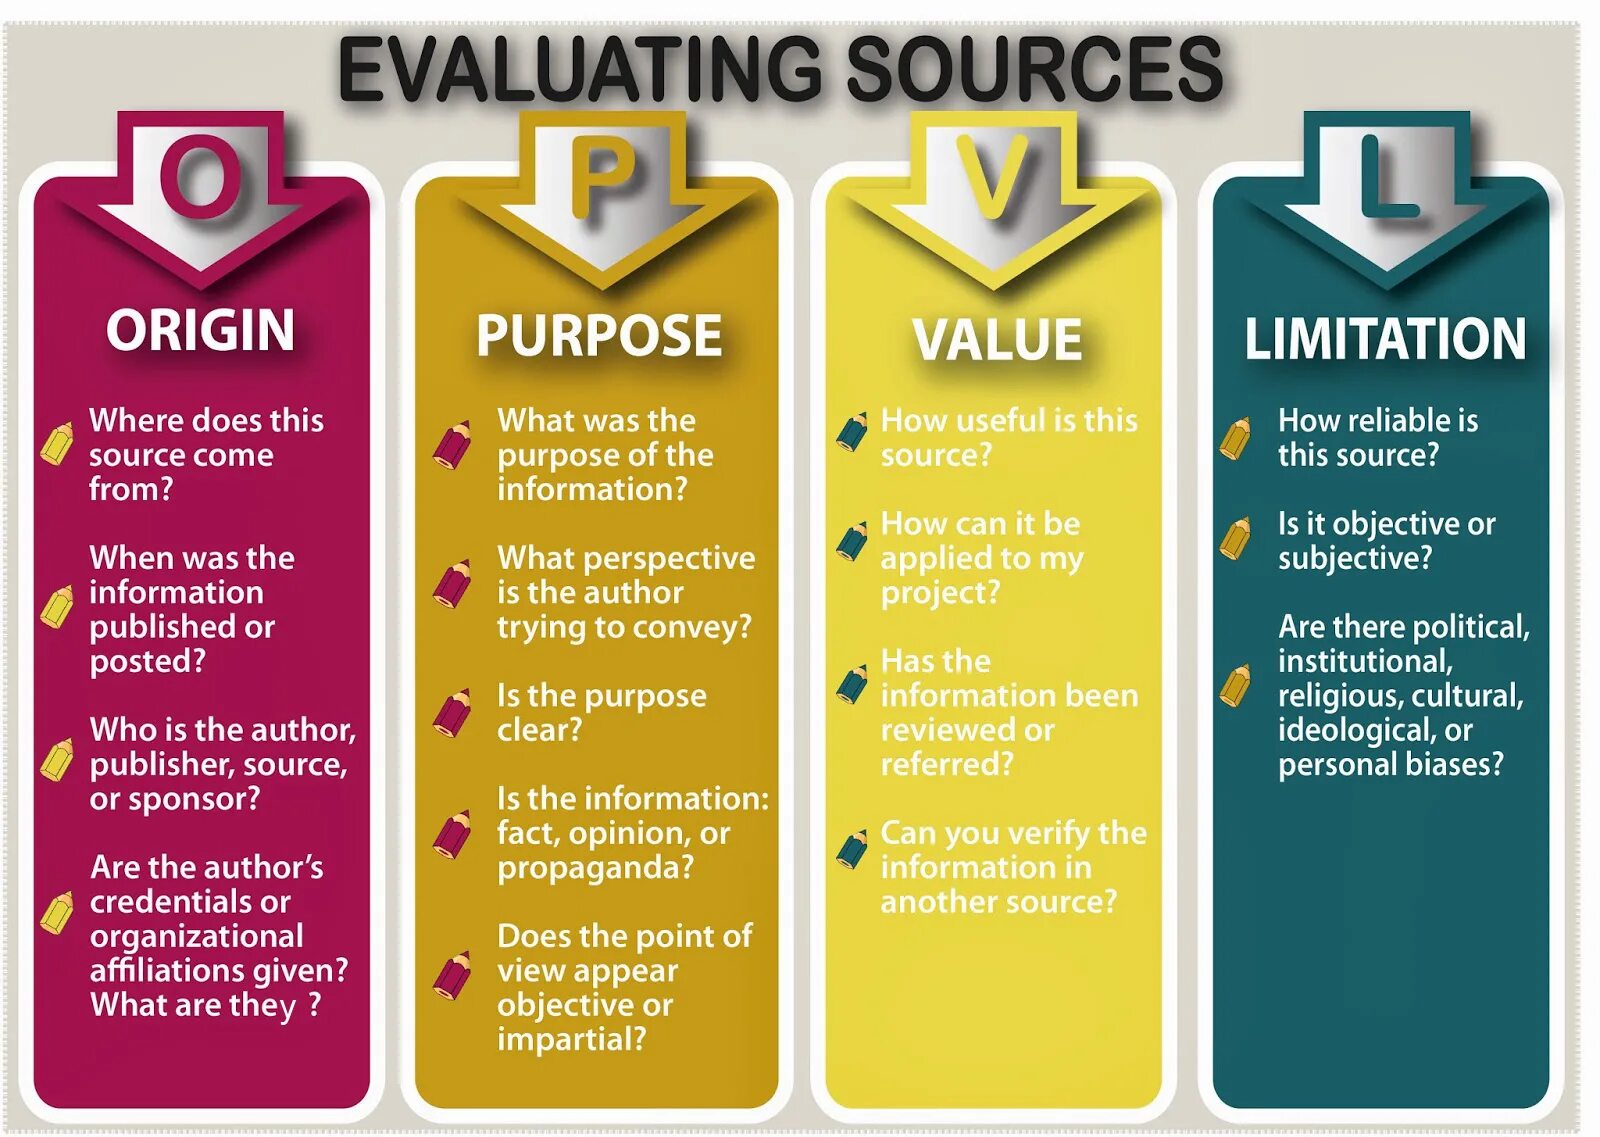 OPVL. Purpose and values. Evaluate sources. OPCVL.